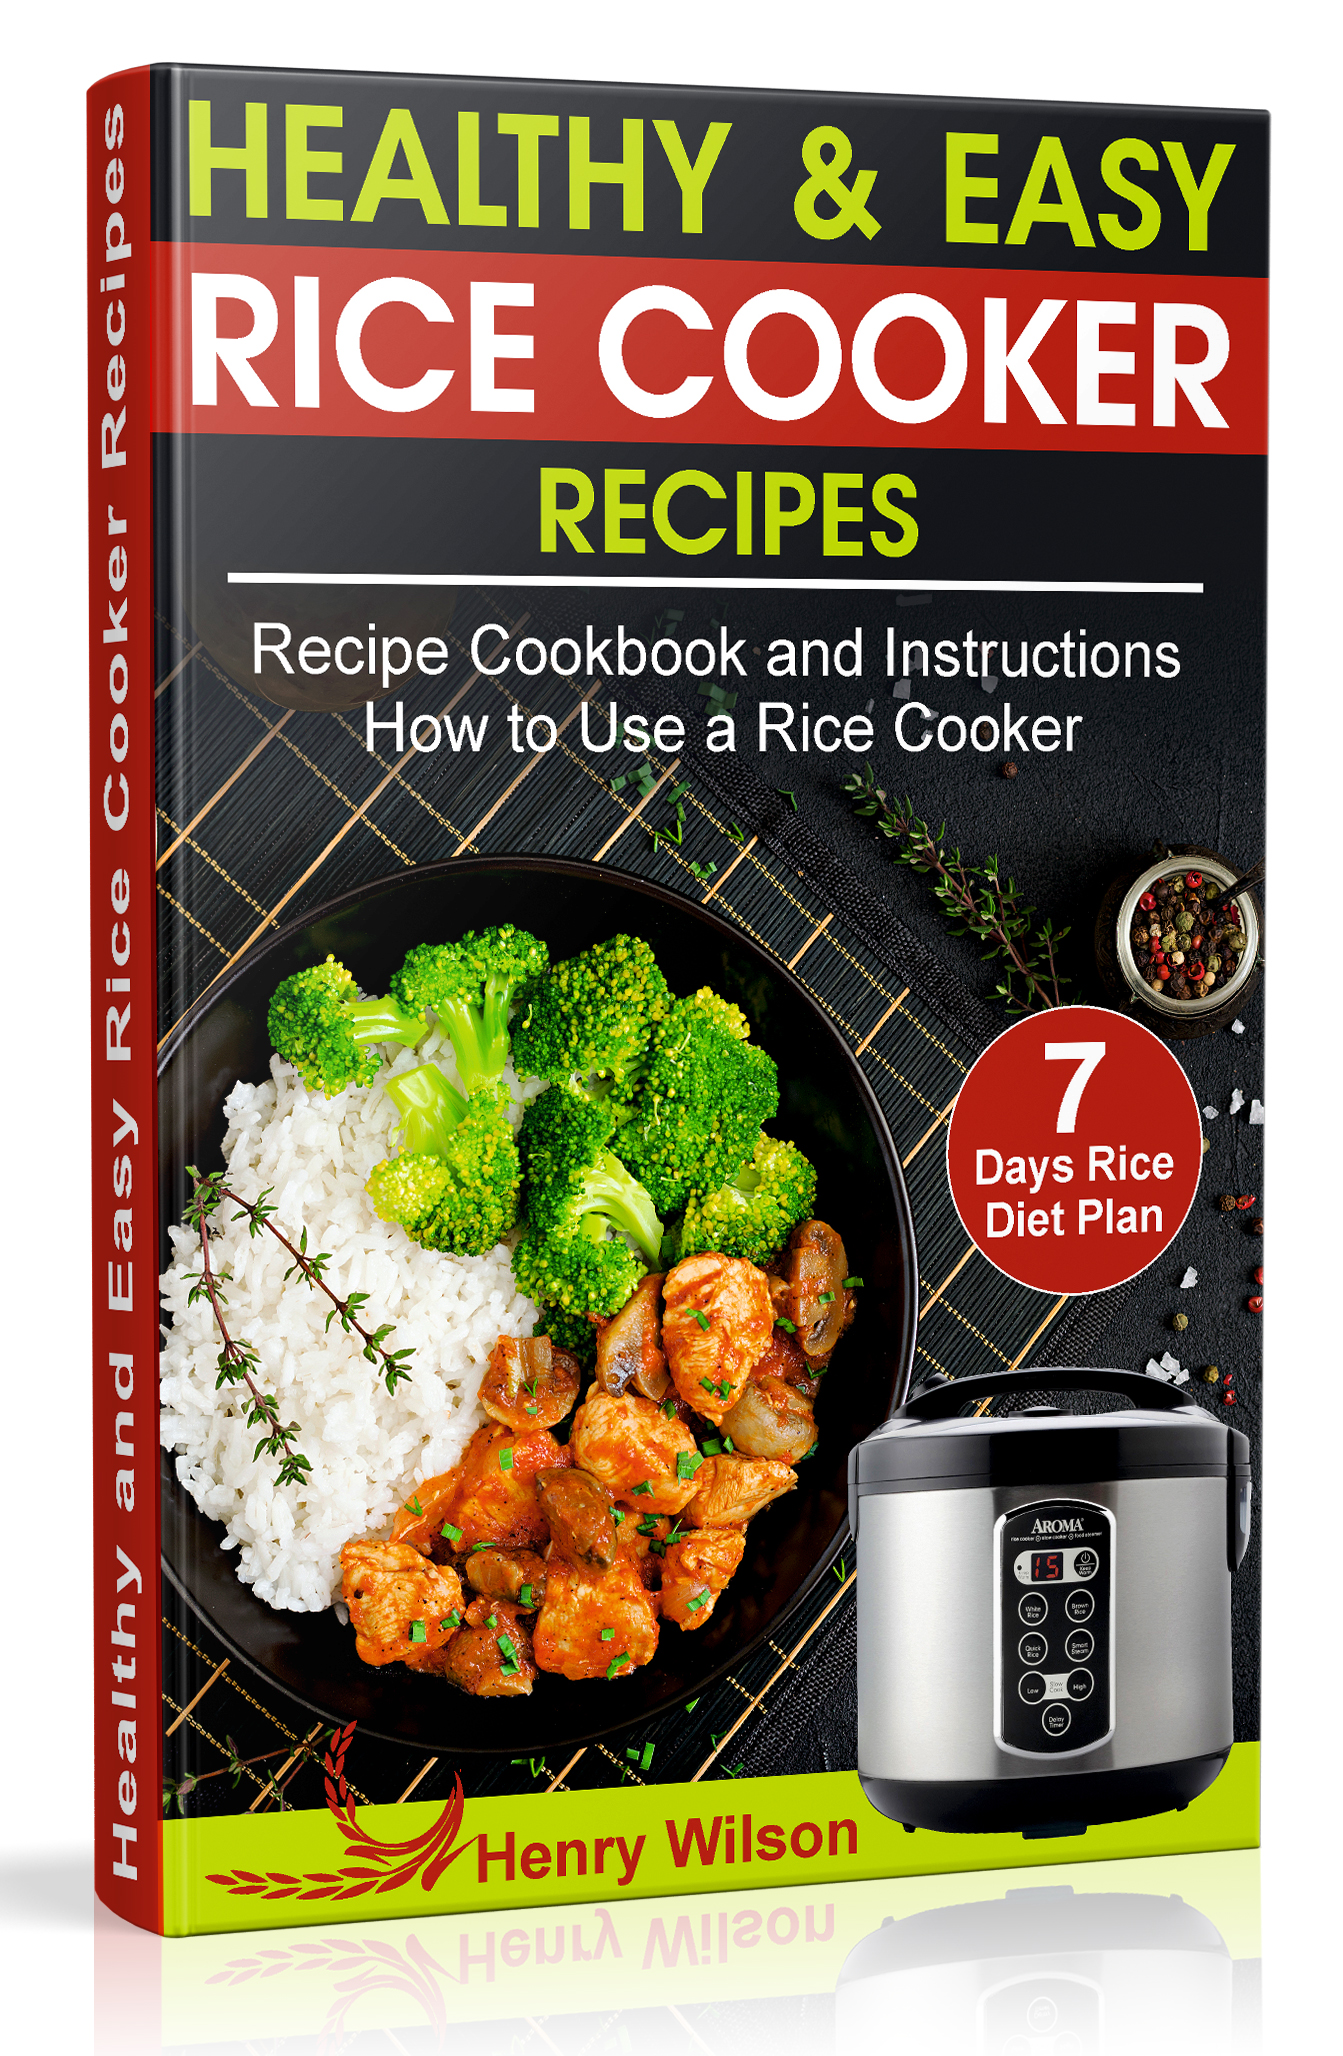 FREE: Healthy and Easy Rice Cooker Recipes: Best Rice Cooker Recipe Cookbook and Instructions How to Use a Rice Cooker (+ Weight Loss Rice Recipe, 7 days Rice Diet Plan by Henry Wilson